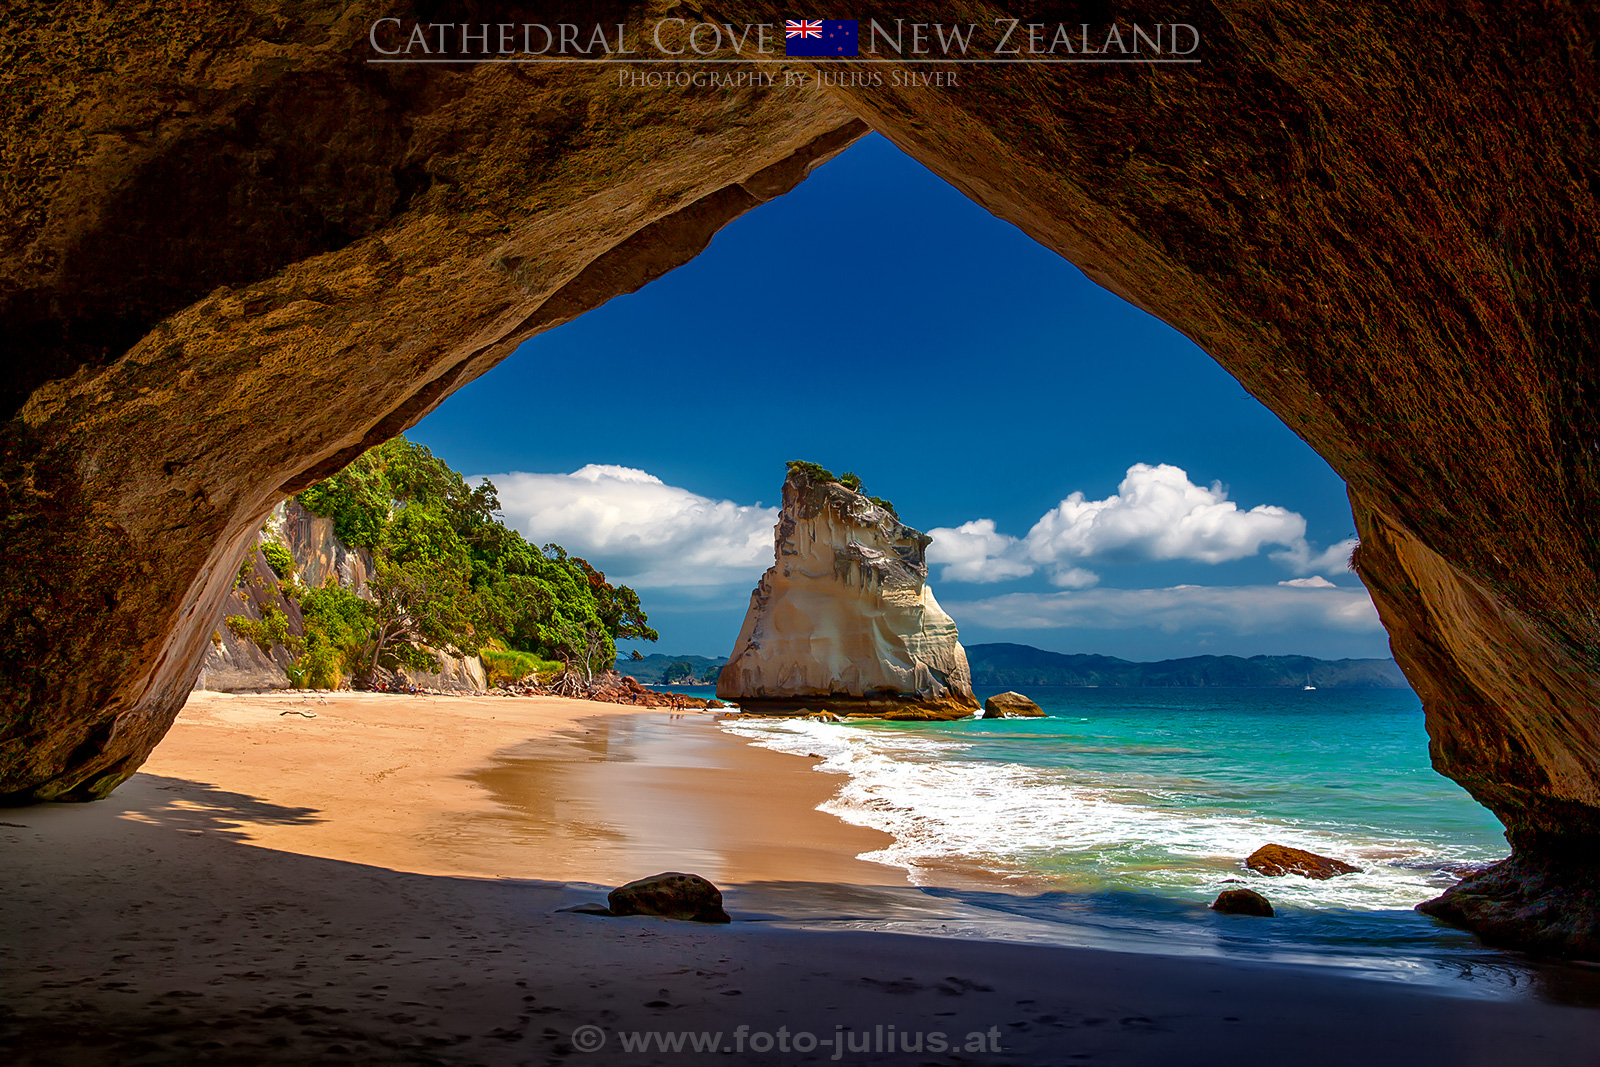 NewZealand037a_Cathedral_Cove.jpg, 1009kB